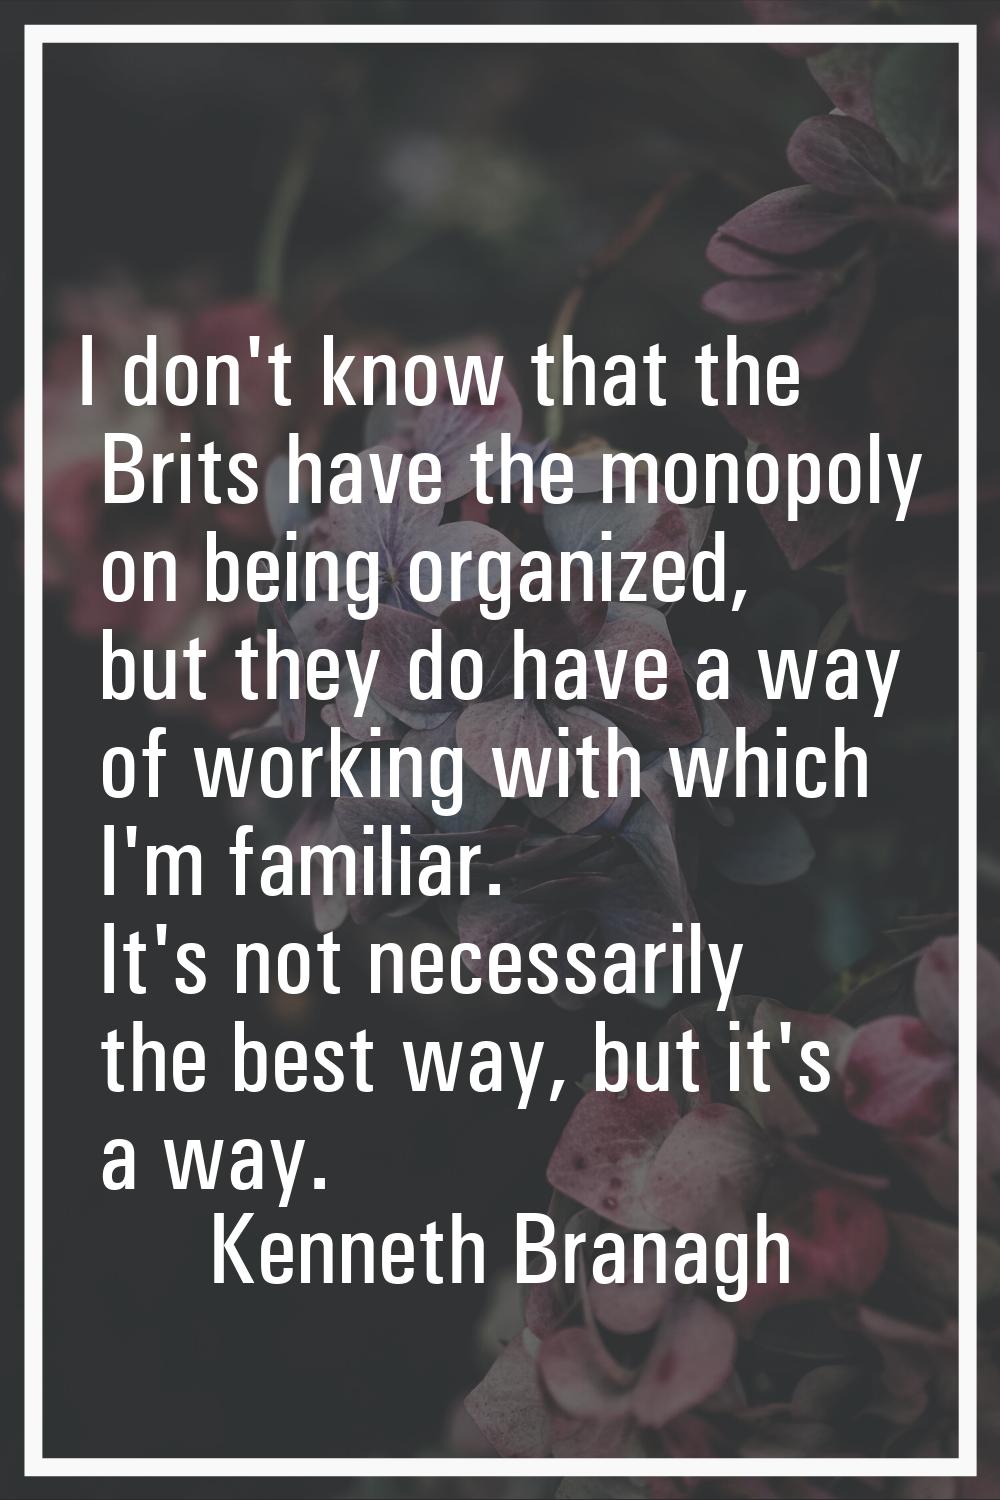 I don't know that the Brits have the monopoly on being organized, but they do have a way of working